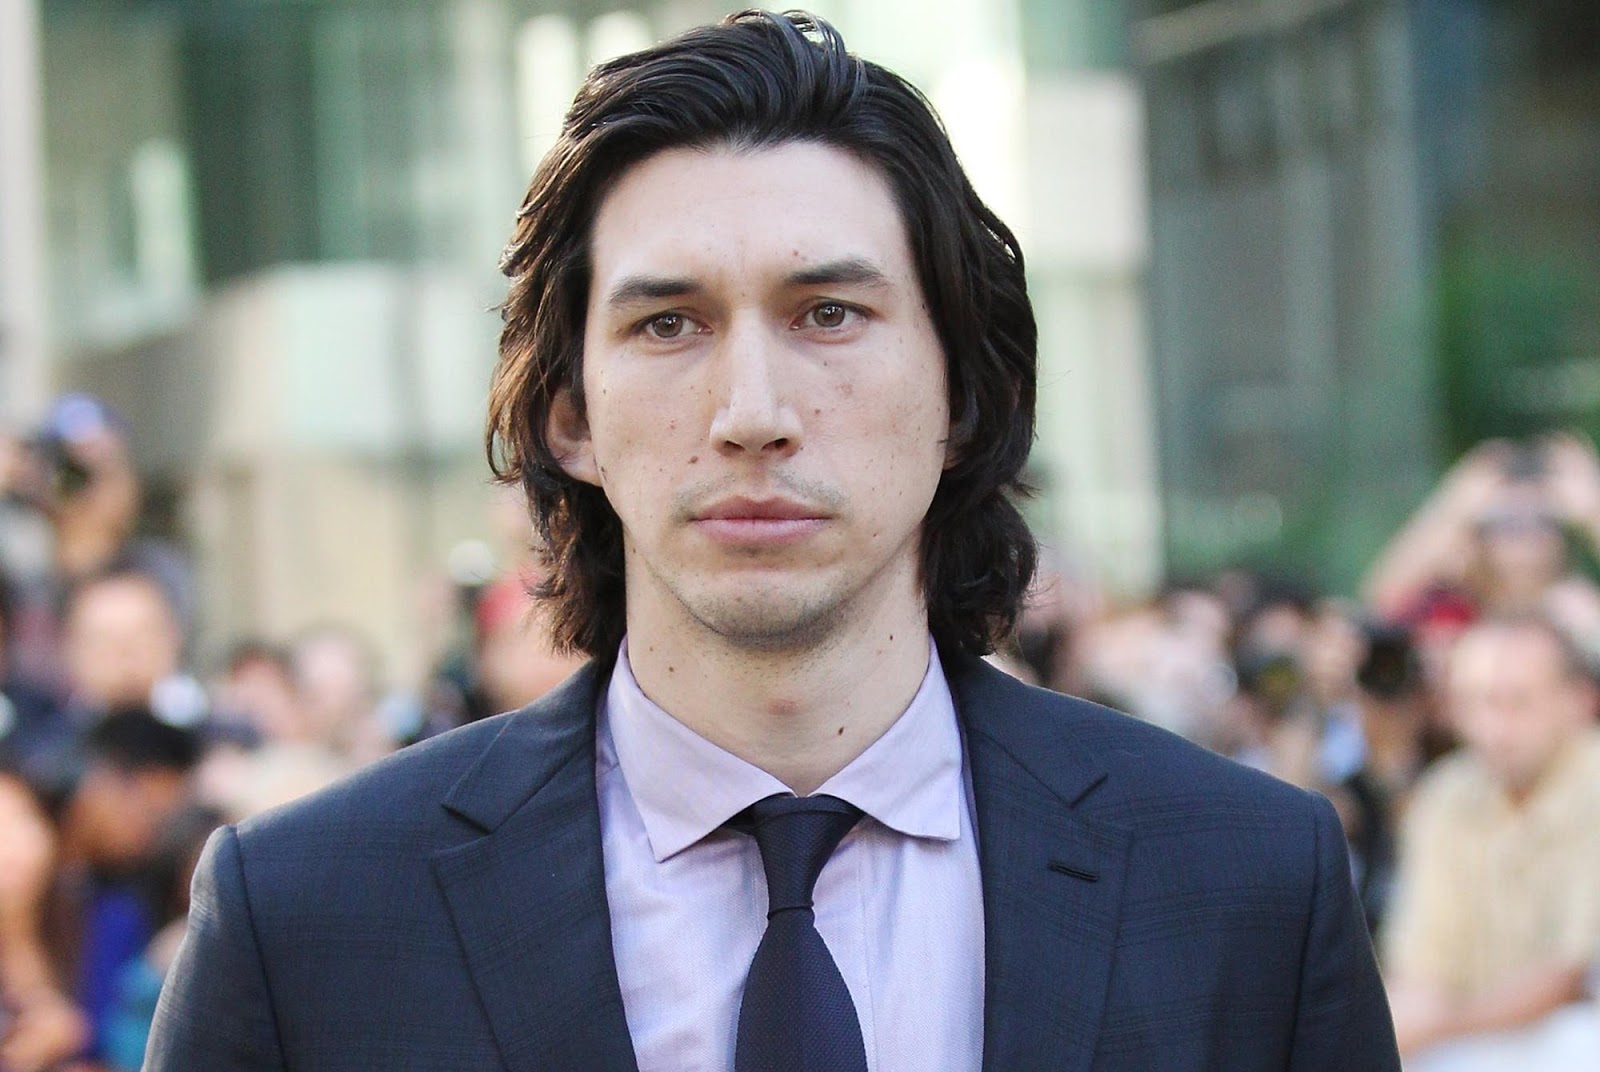 List of Actors Adam Driver  new upcoming Hollywood movies in 2016, 2017 Calendar on Upcoming Wiki. Updated list of movies 2016-2017. Info about films released in wiki, imdb, wikipedia.